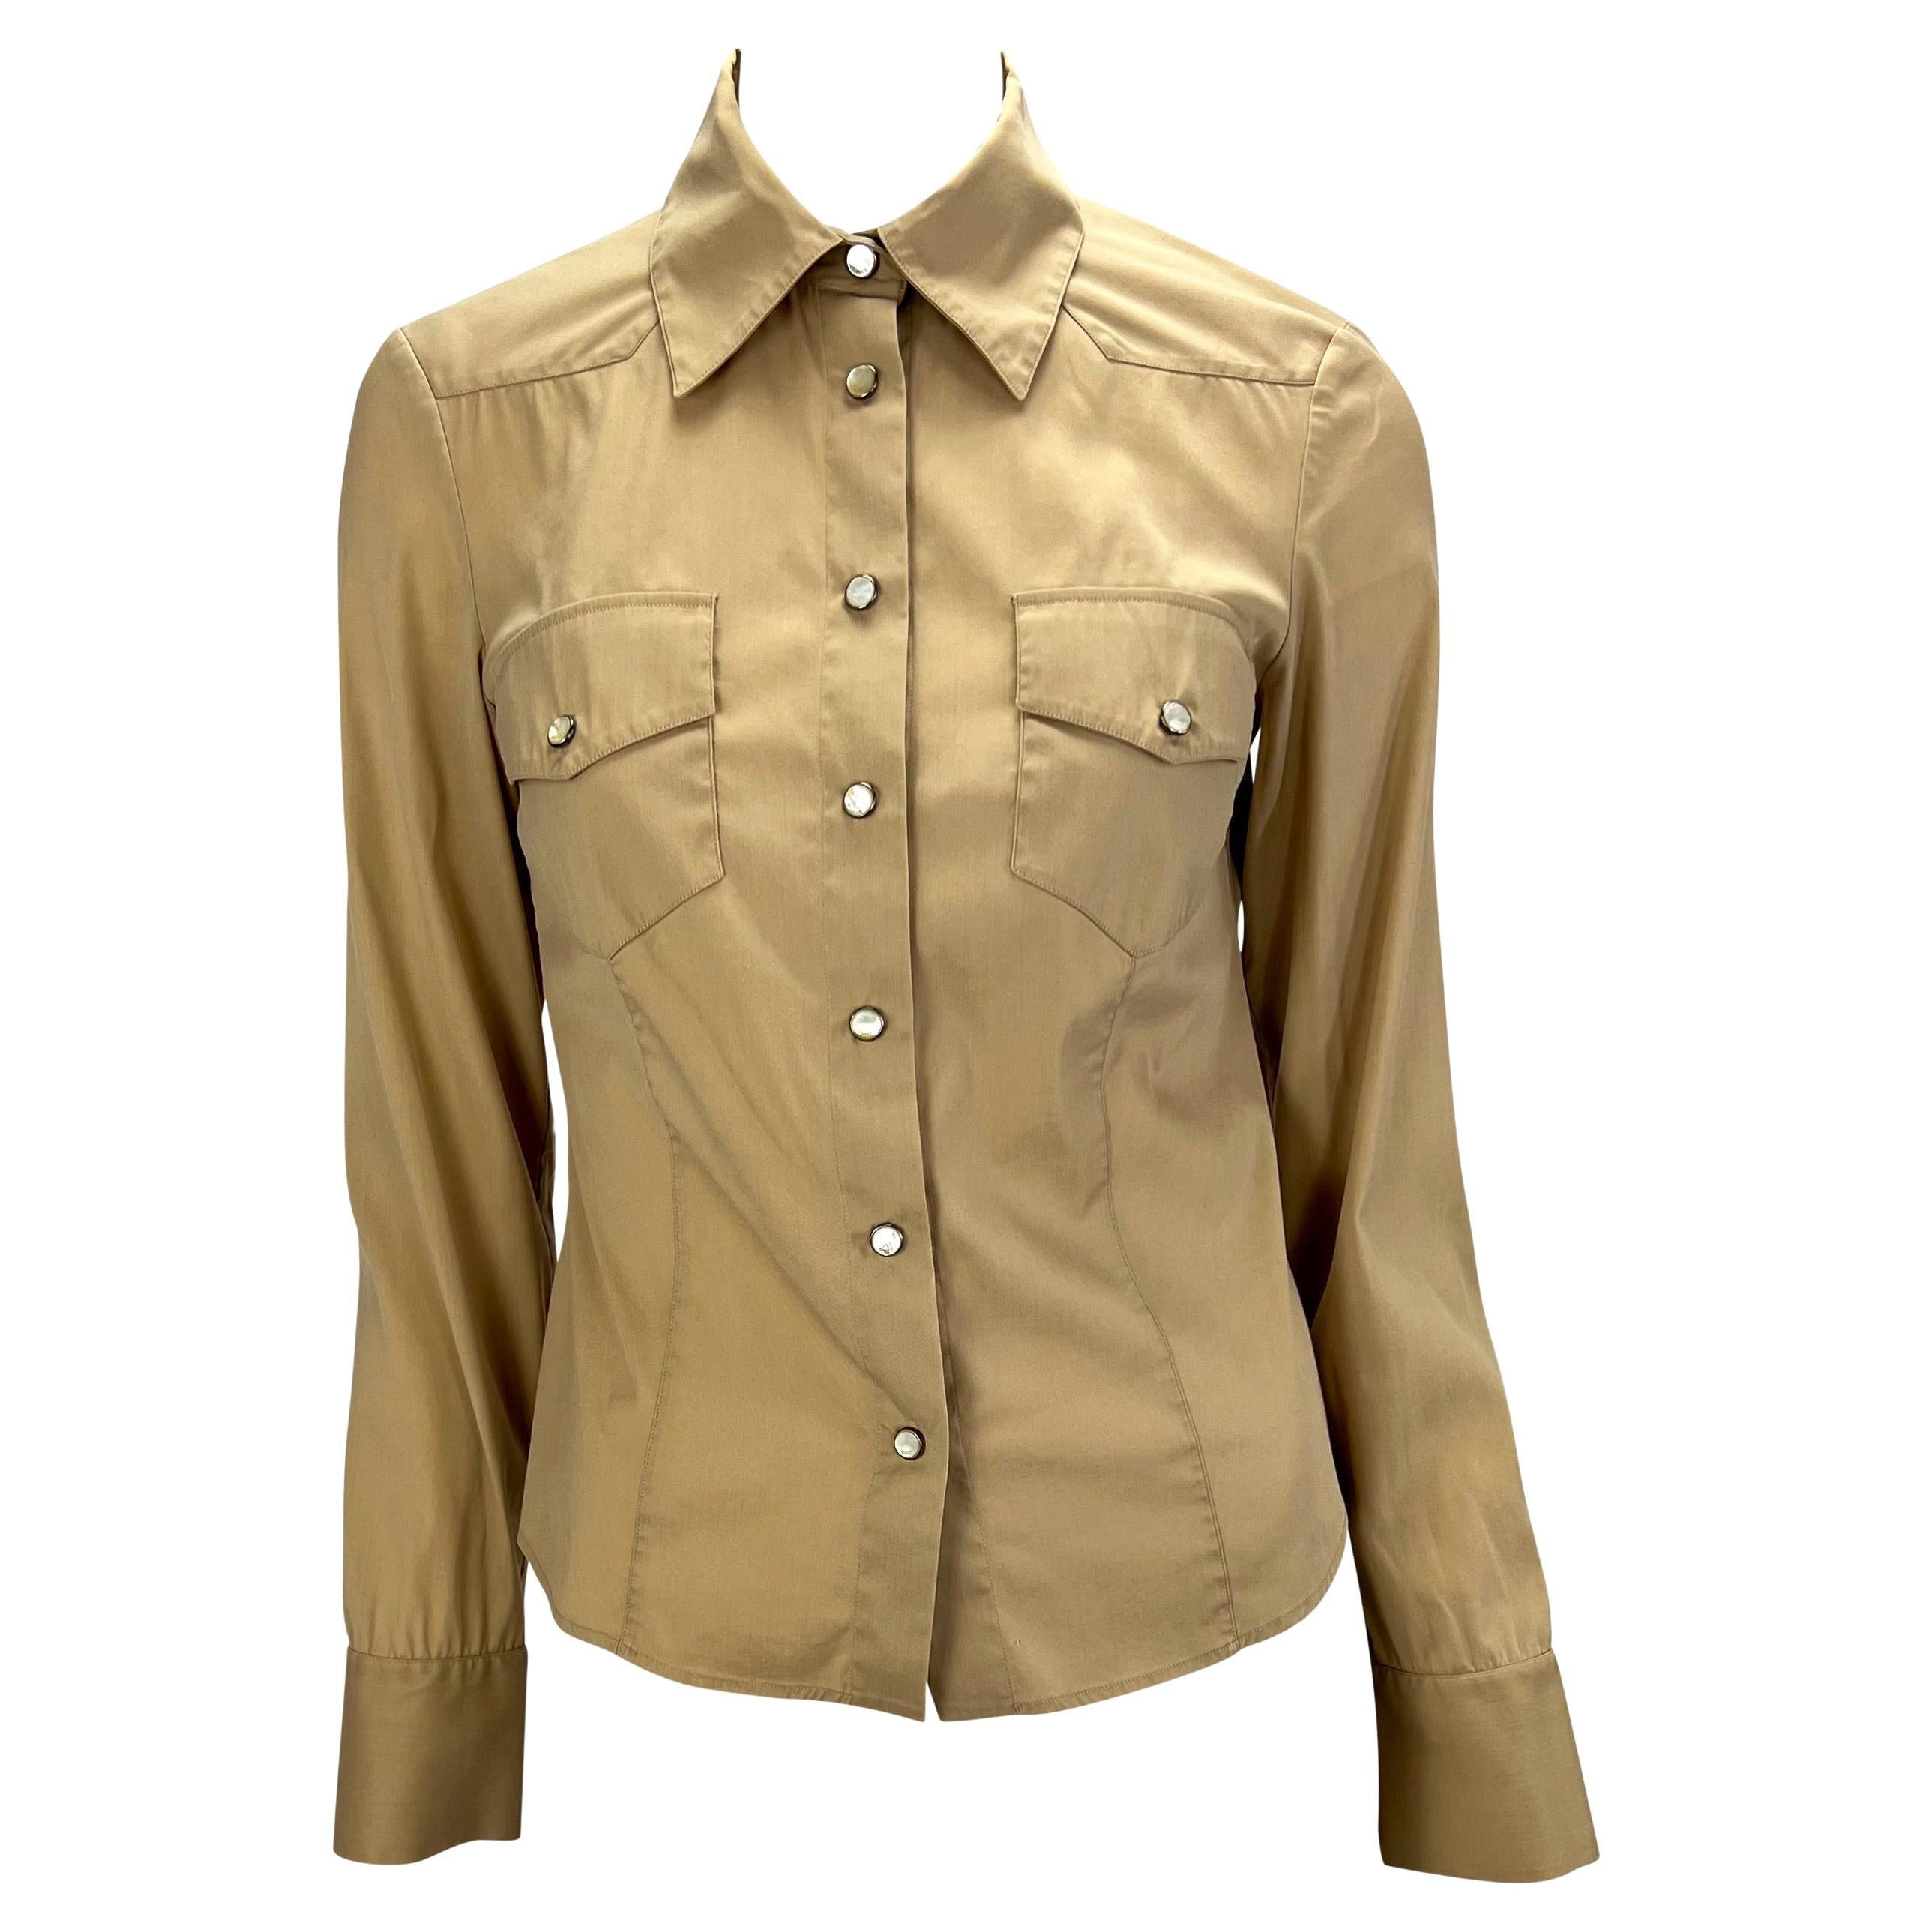 S/S 2002 Gucci by Tom Ford Beige Mother of Pearl Snap Collared Stretch Shirt 